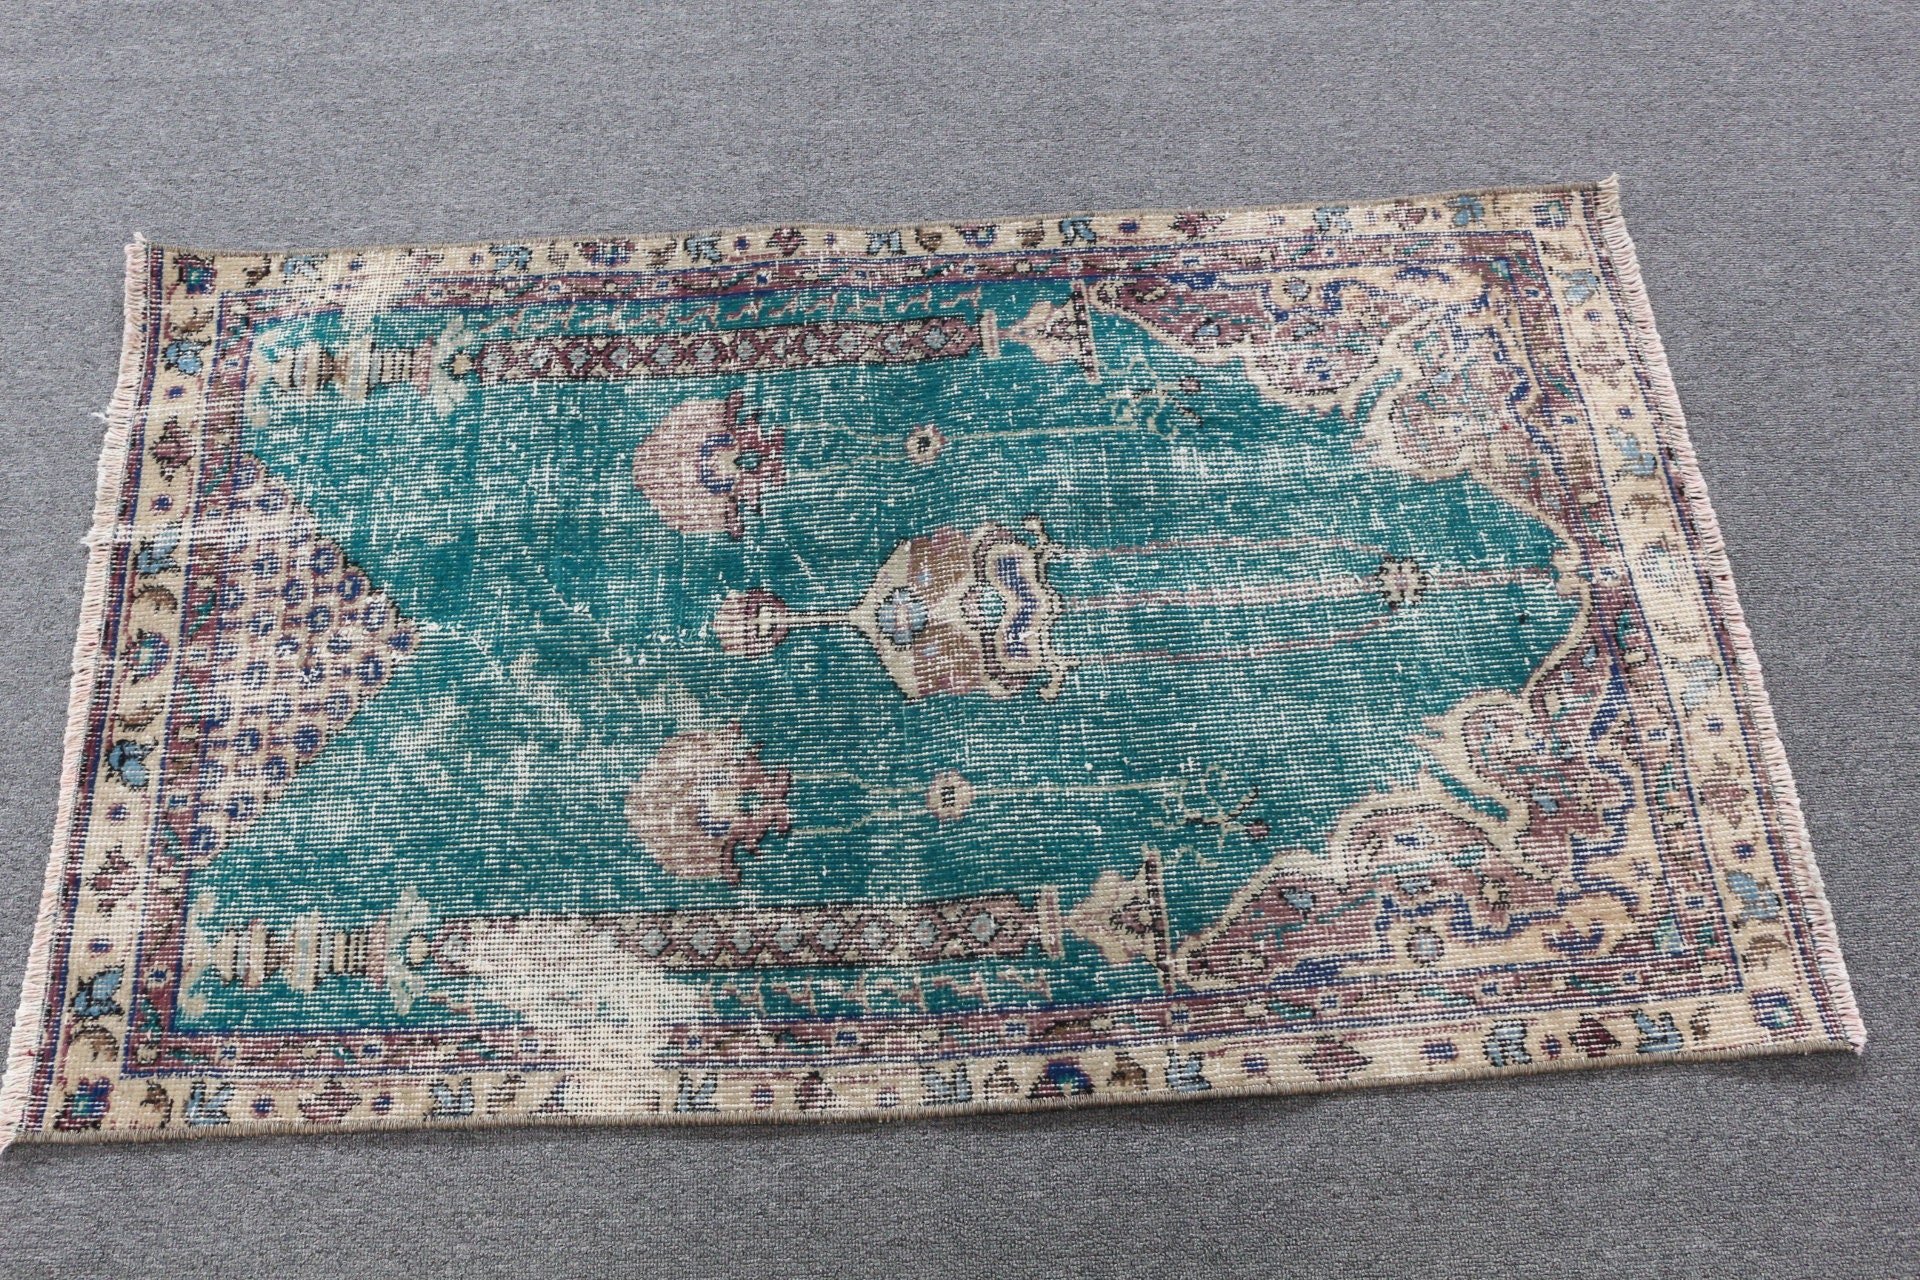 Vintage Rug, Antique Rug, Kitchen Rug, Rugs for Bedroom, Turkish Rugs, Bedroom Rugs, 2.4x4.1 ft Small Rug, Green Antique Rug, Entry Rugs